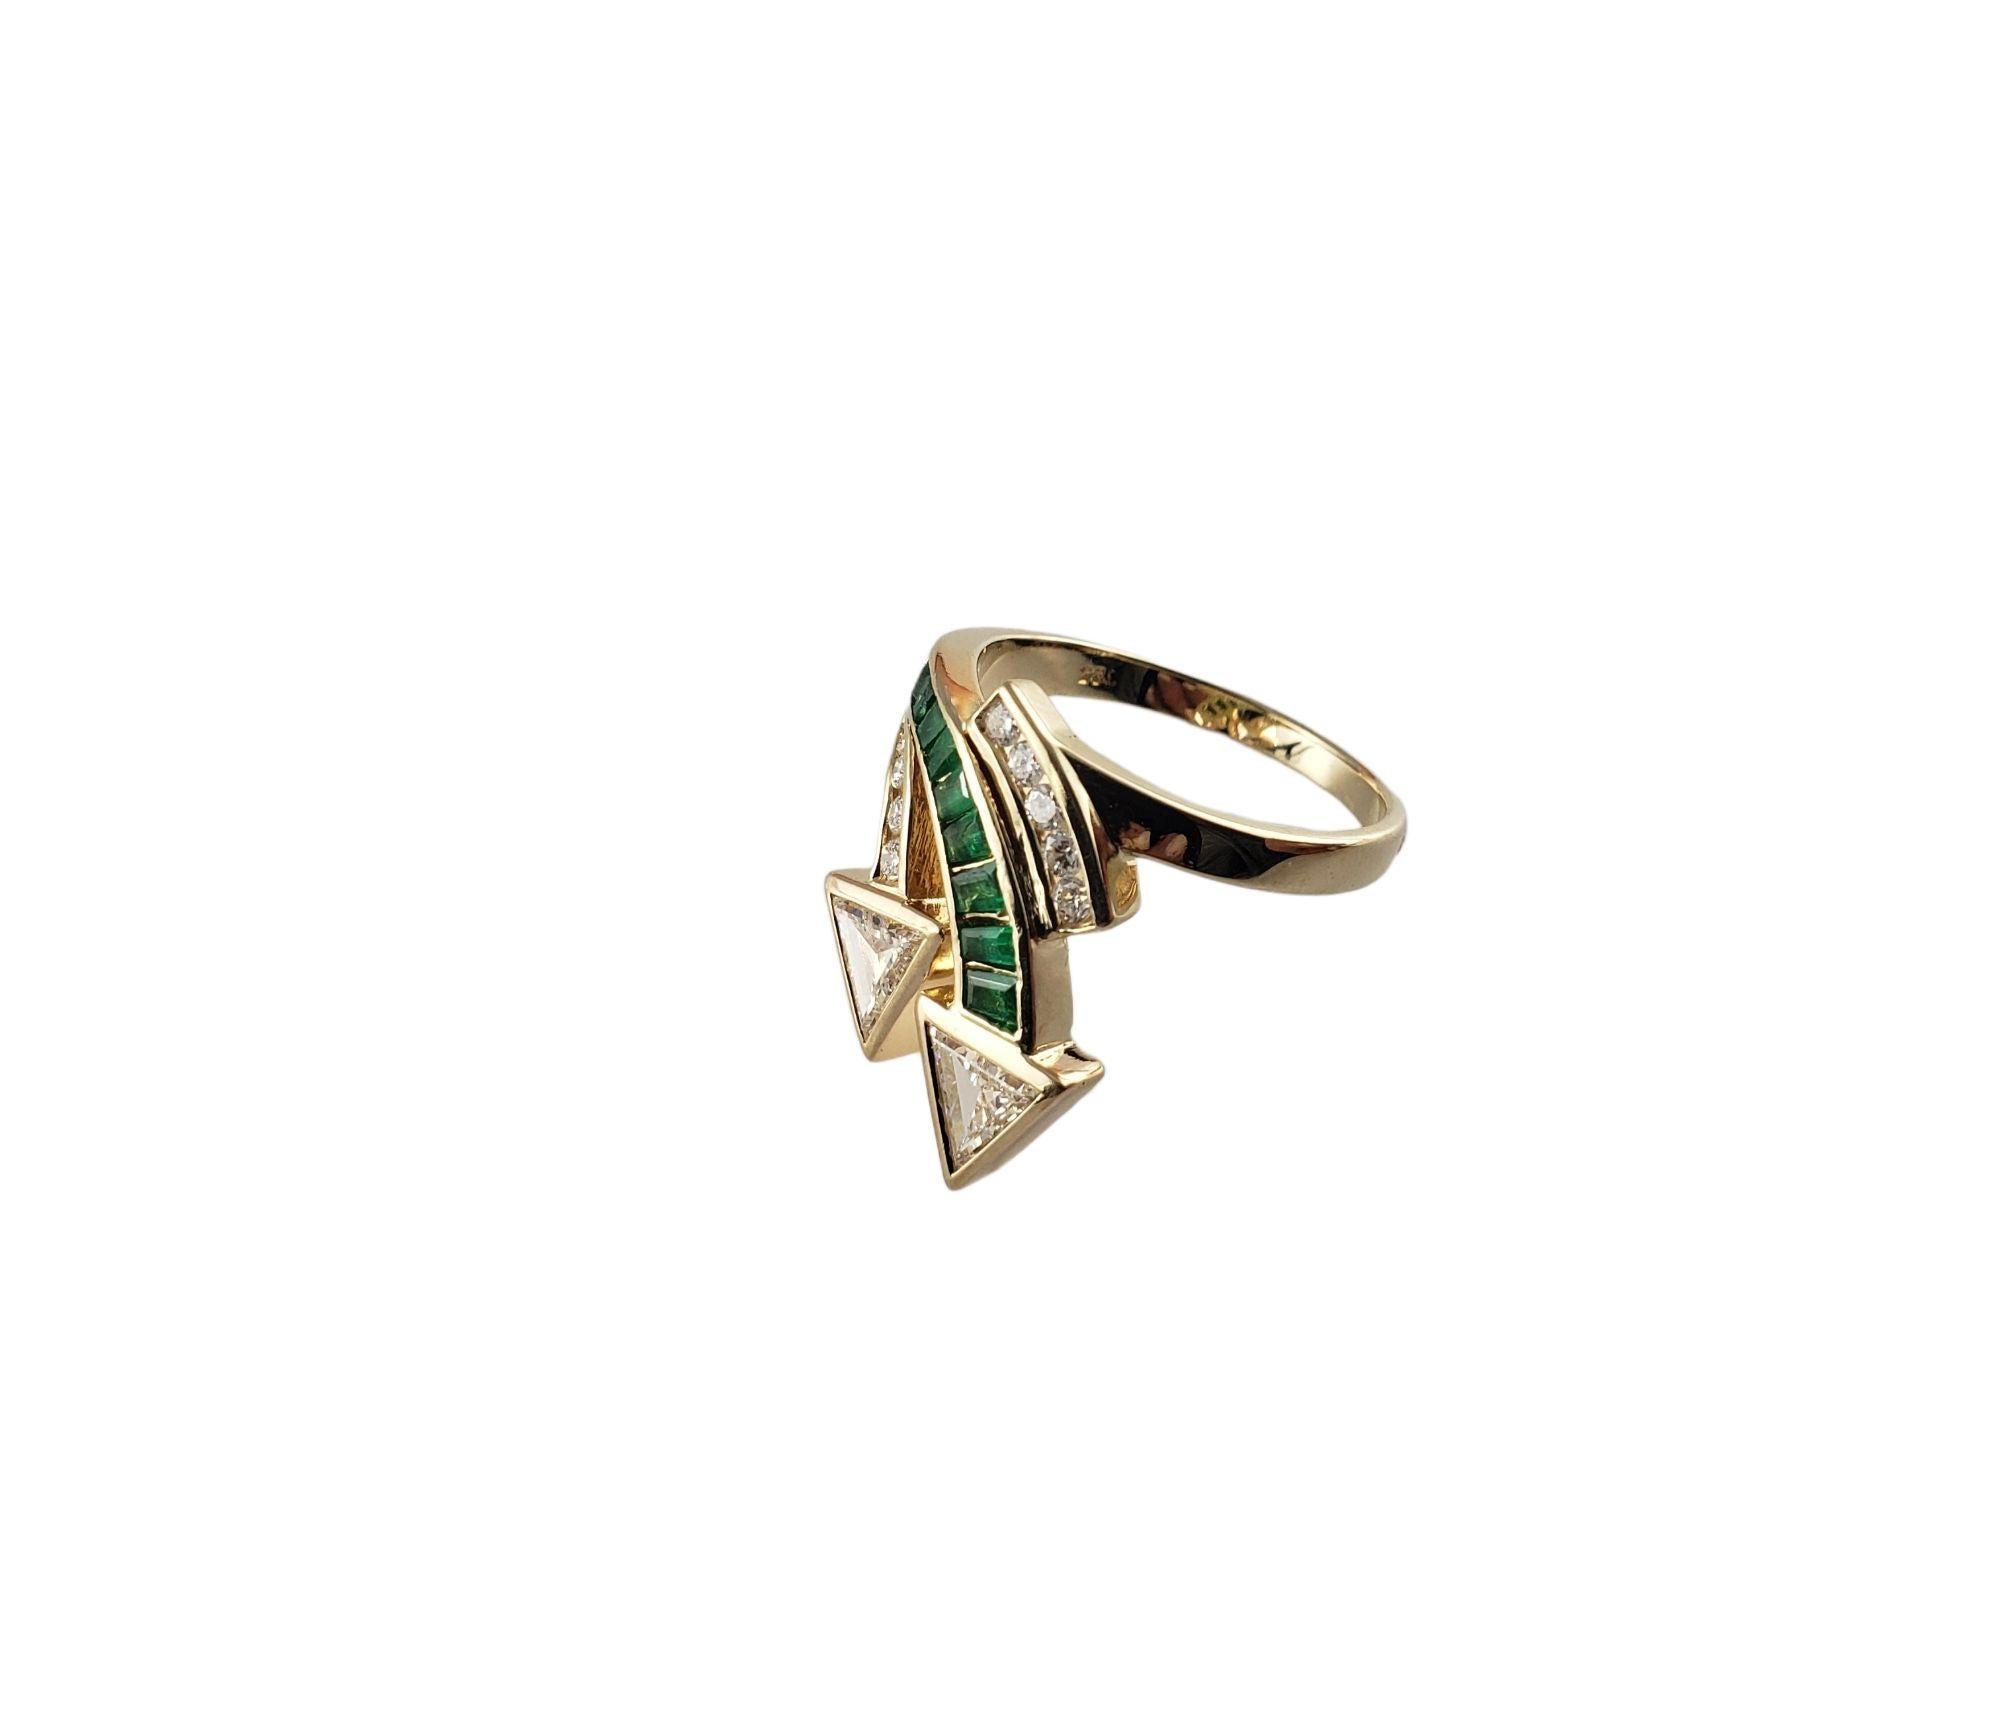 Vintage 14 Karat Yellow Gold Emerald and Diamond Ring Size 6.5 JAGi Certified-

This stunning ring features nine baguette emeralds, two triangle brilliant cut diamonds and nine round brilliant cut diamonds set in classic 14K yellow gold. Width: 19